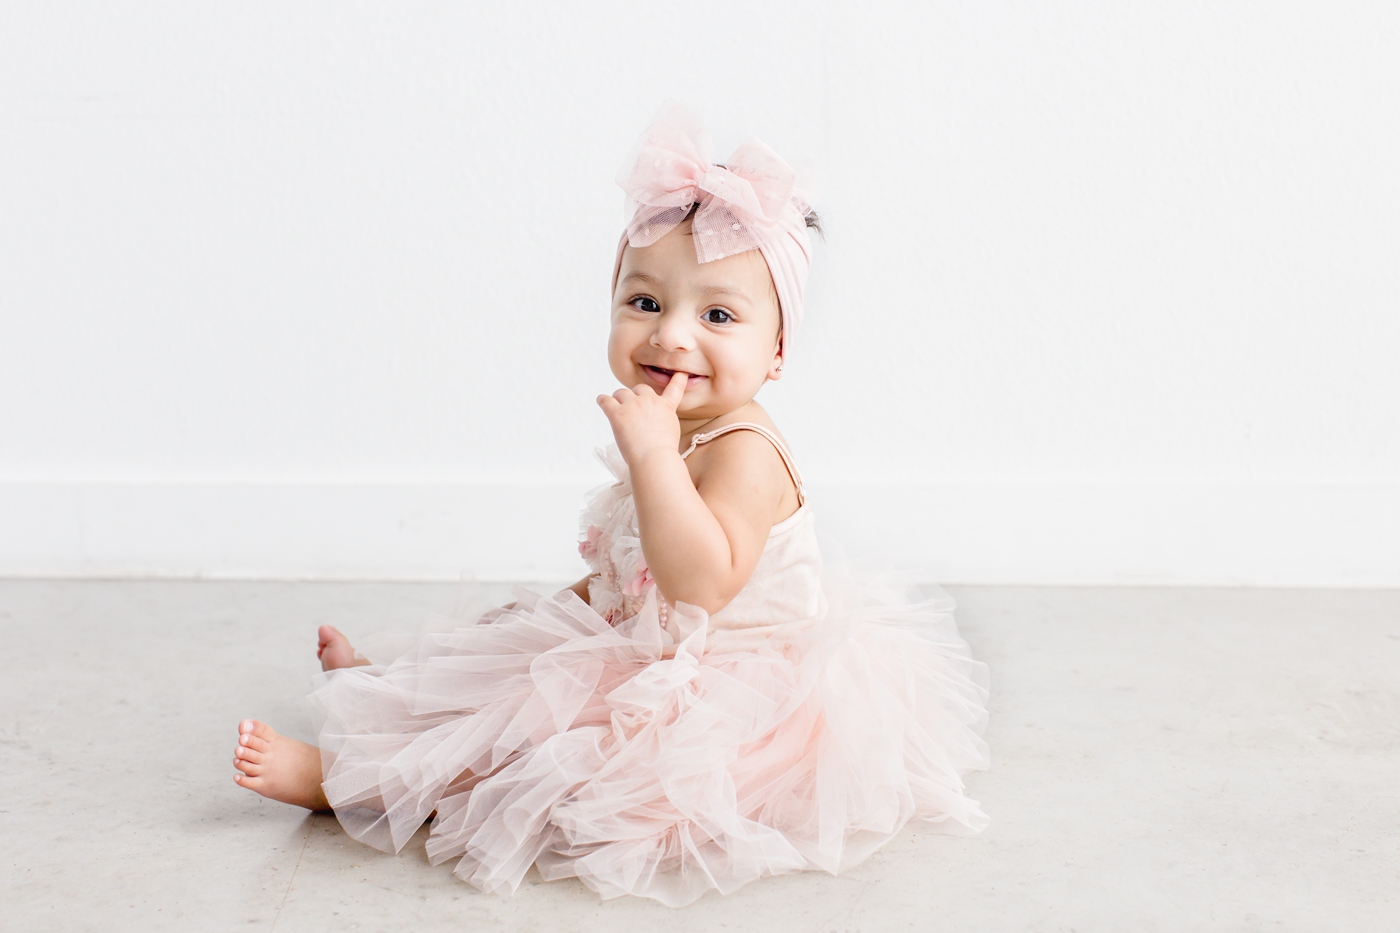 Baby girl smiling at camera while wearing light pink tulle dress for milestone session. Photo by Sana Ahmed Photography.